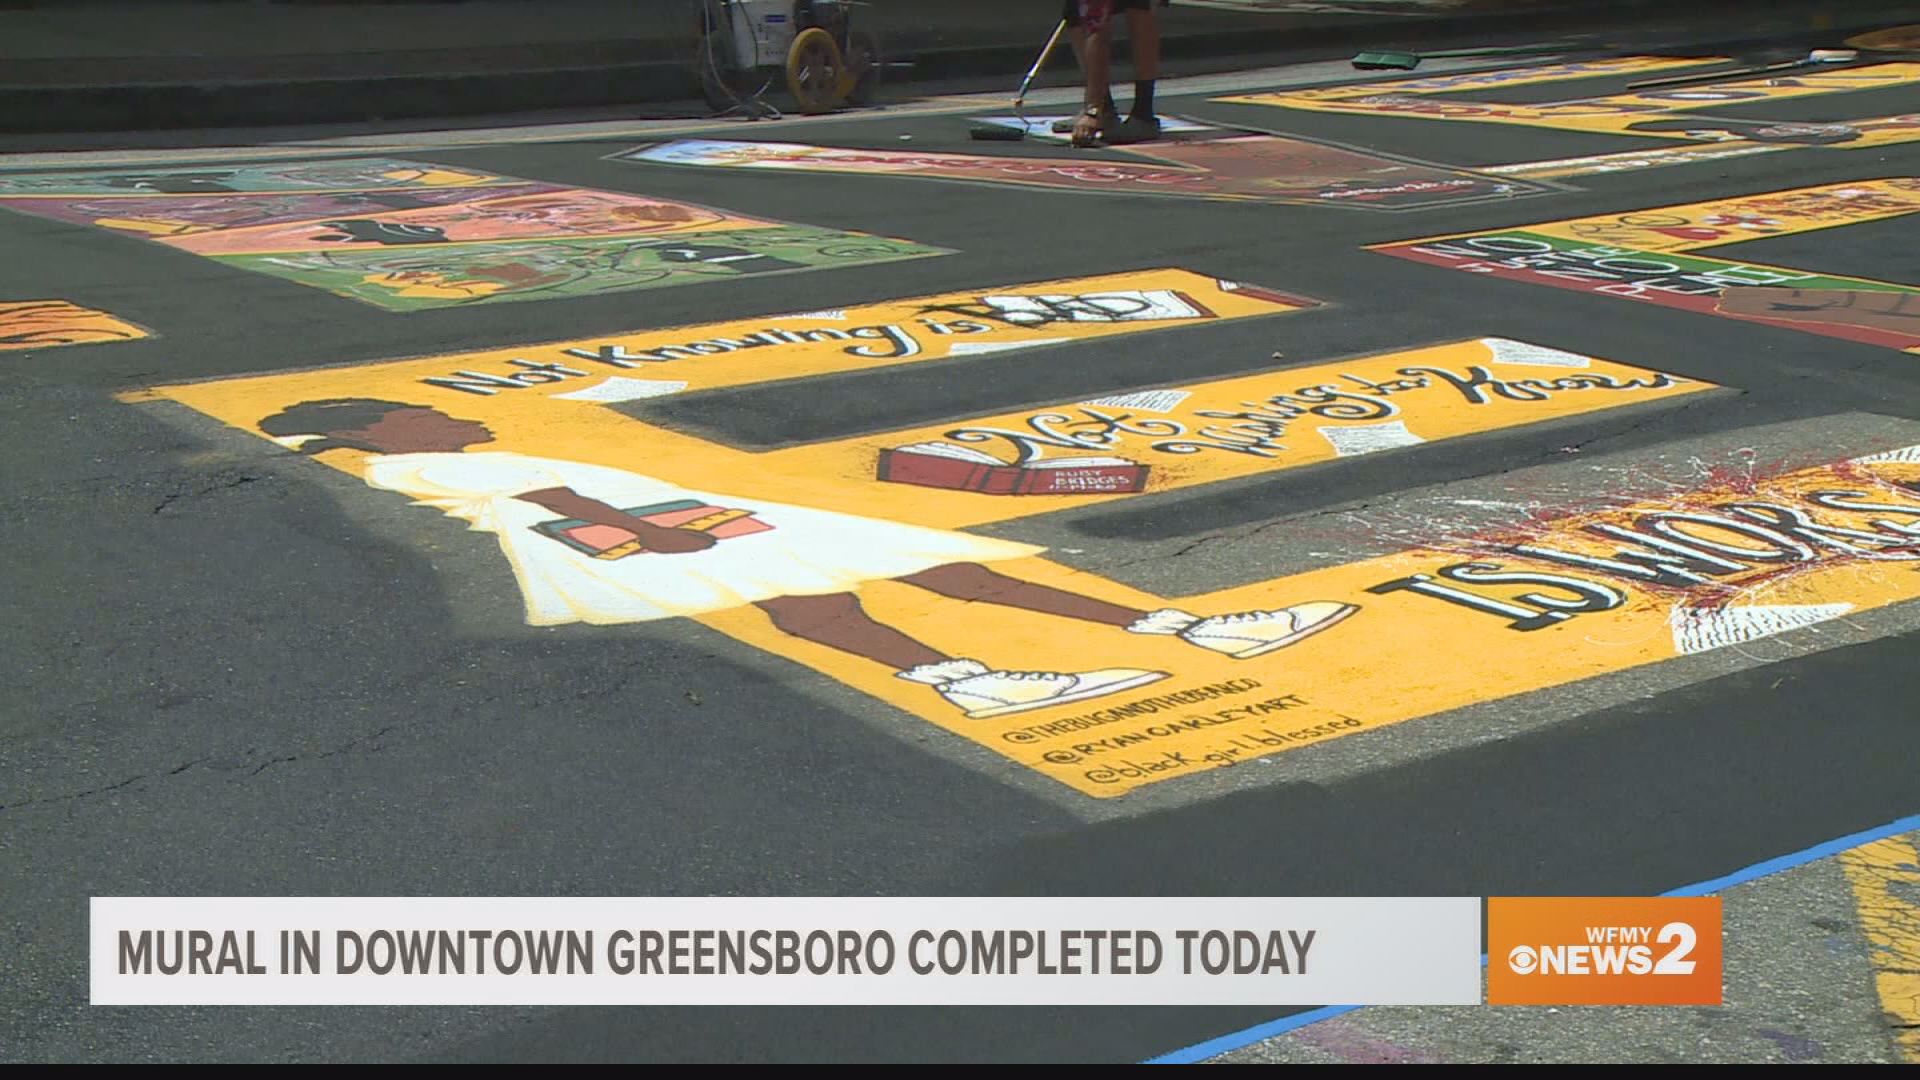 The new "Black Lives Matter" mural sits on Elm Street near February One Place in downtown Greensboro.